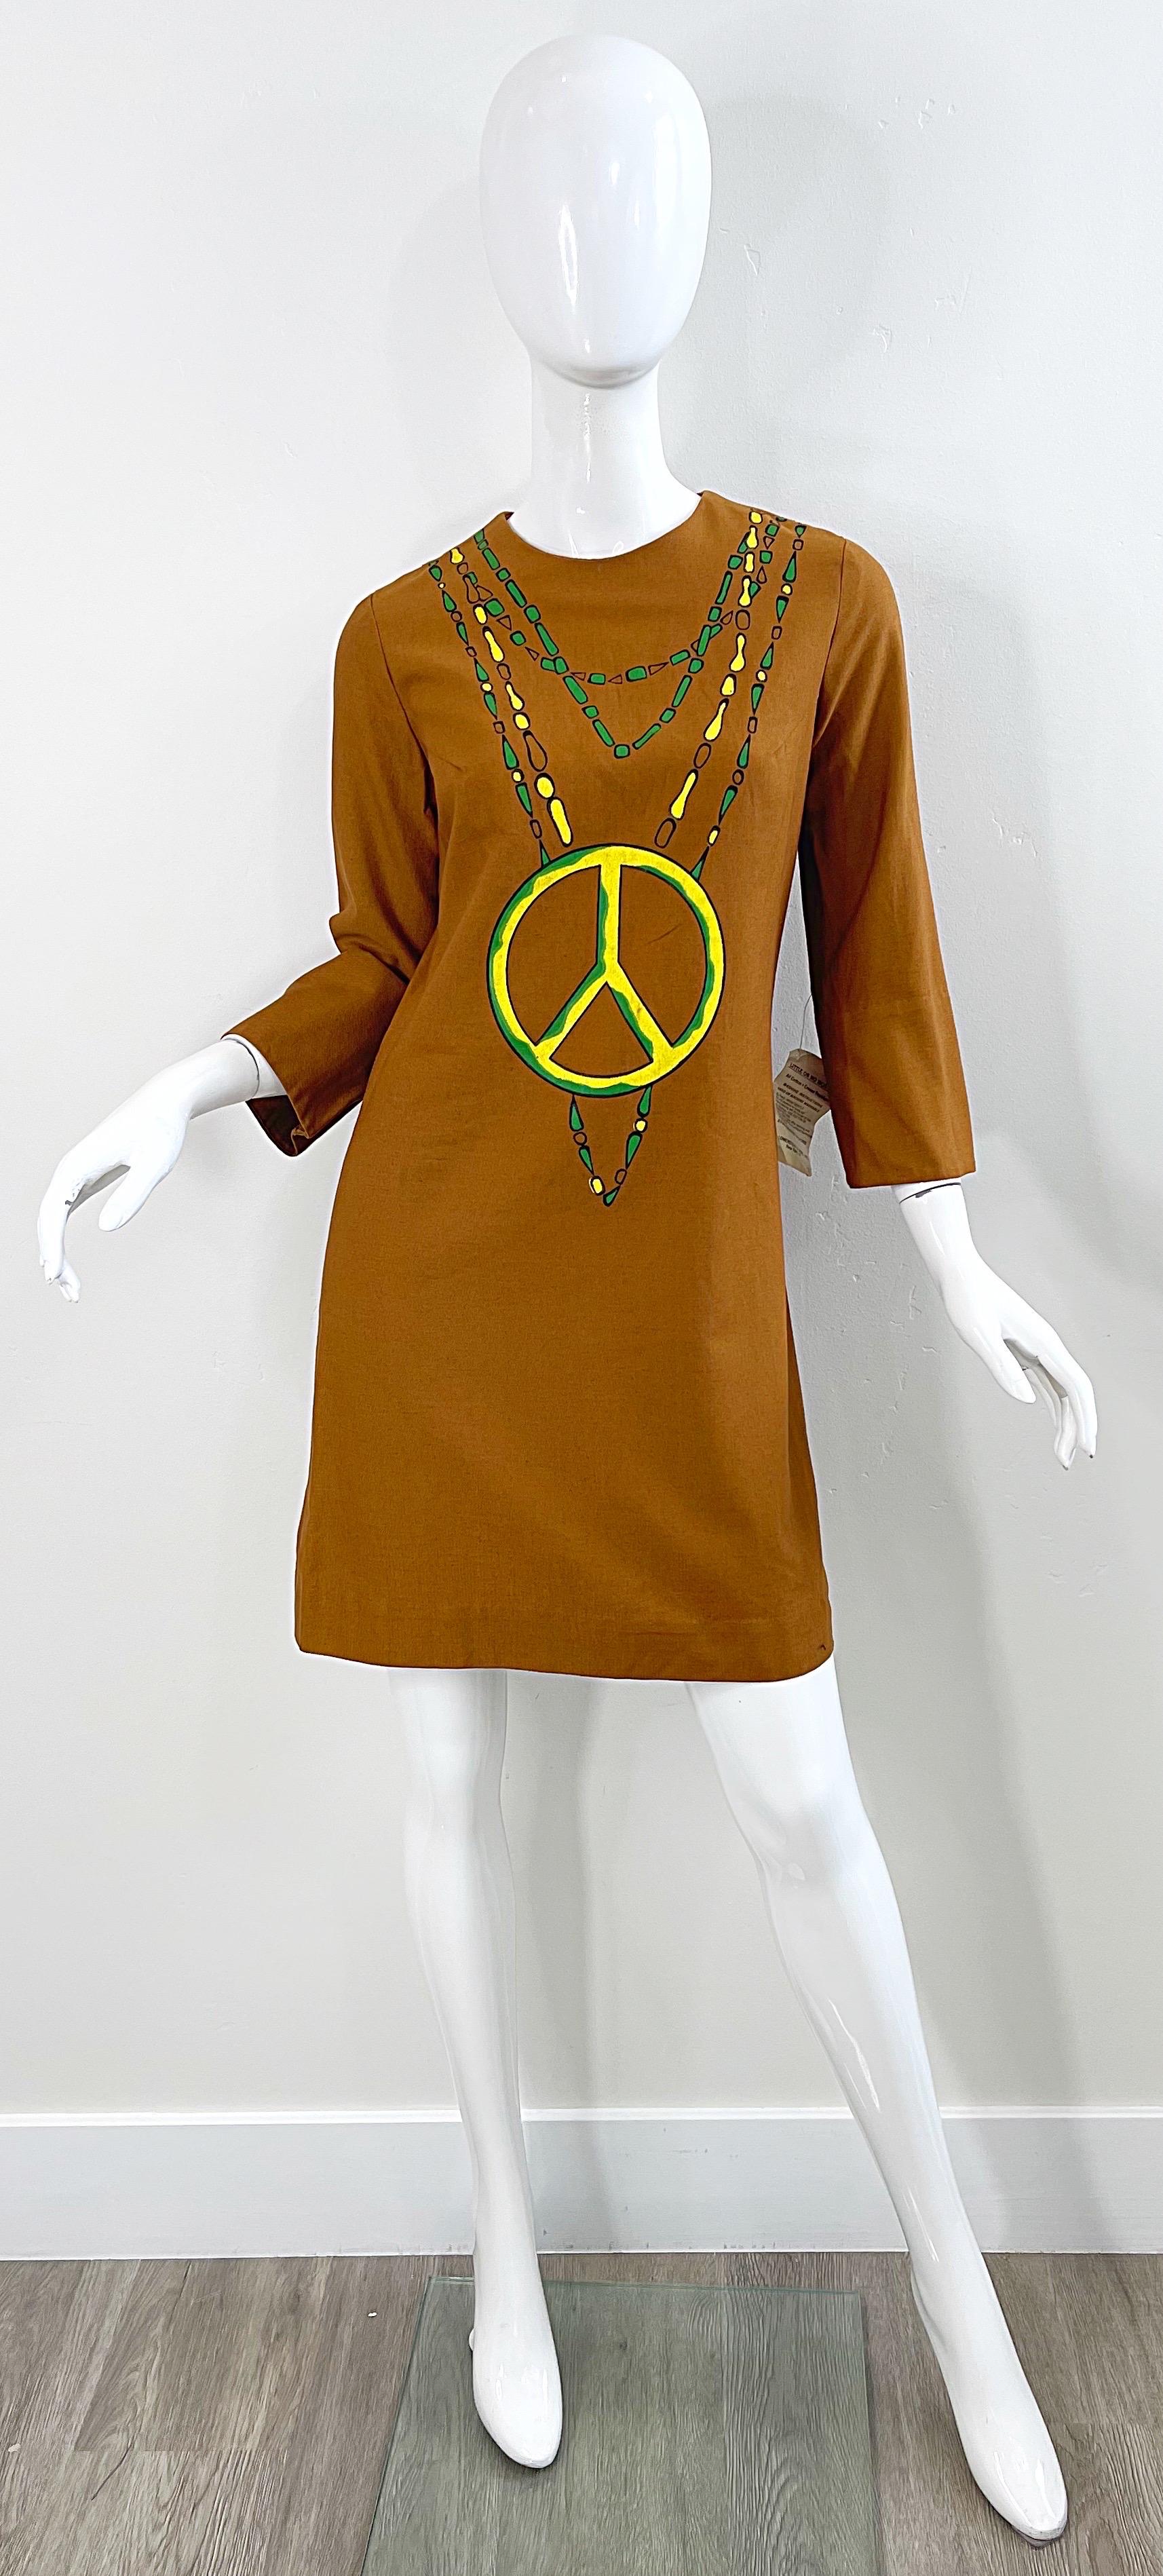 Deadstock chic hand painted peace sign cotton shift dress ! Features brown terracotta color, painted with green and yellow. Hidden metal zipper up the back with hook-and-eye closure. Perfect for any day or evening event. Pair with wedges, sandals or